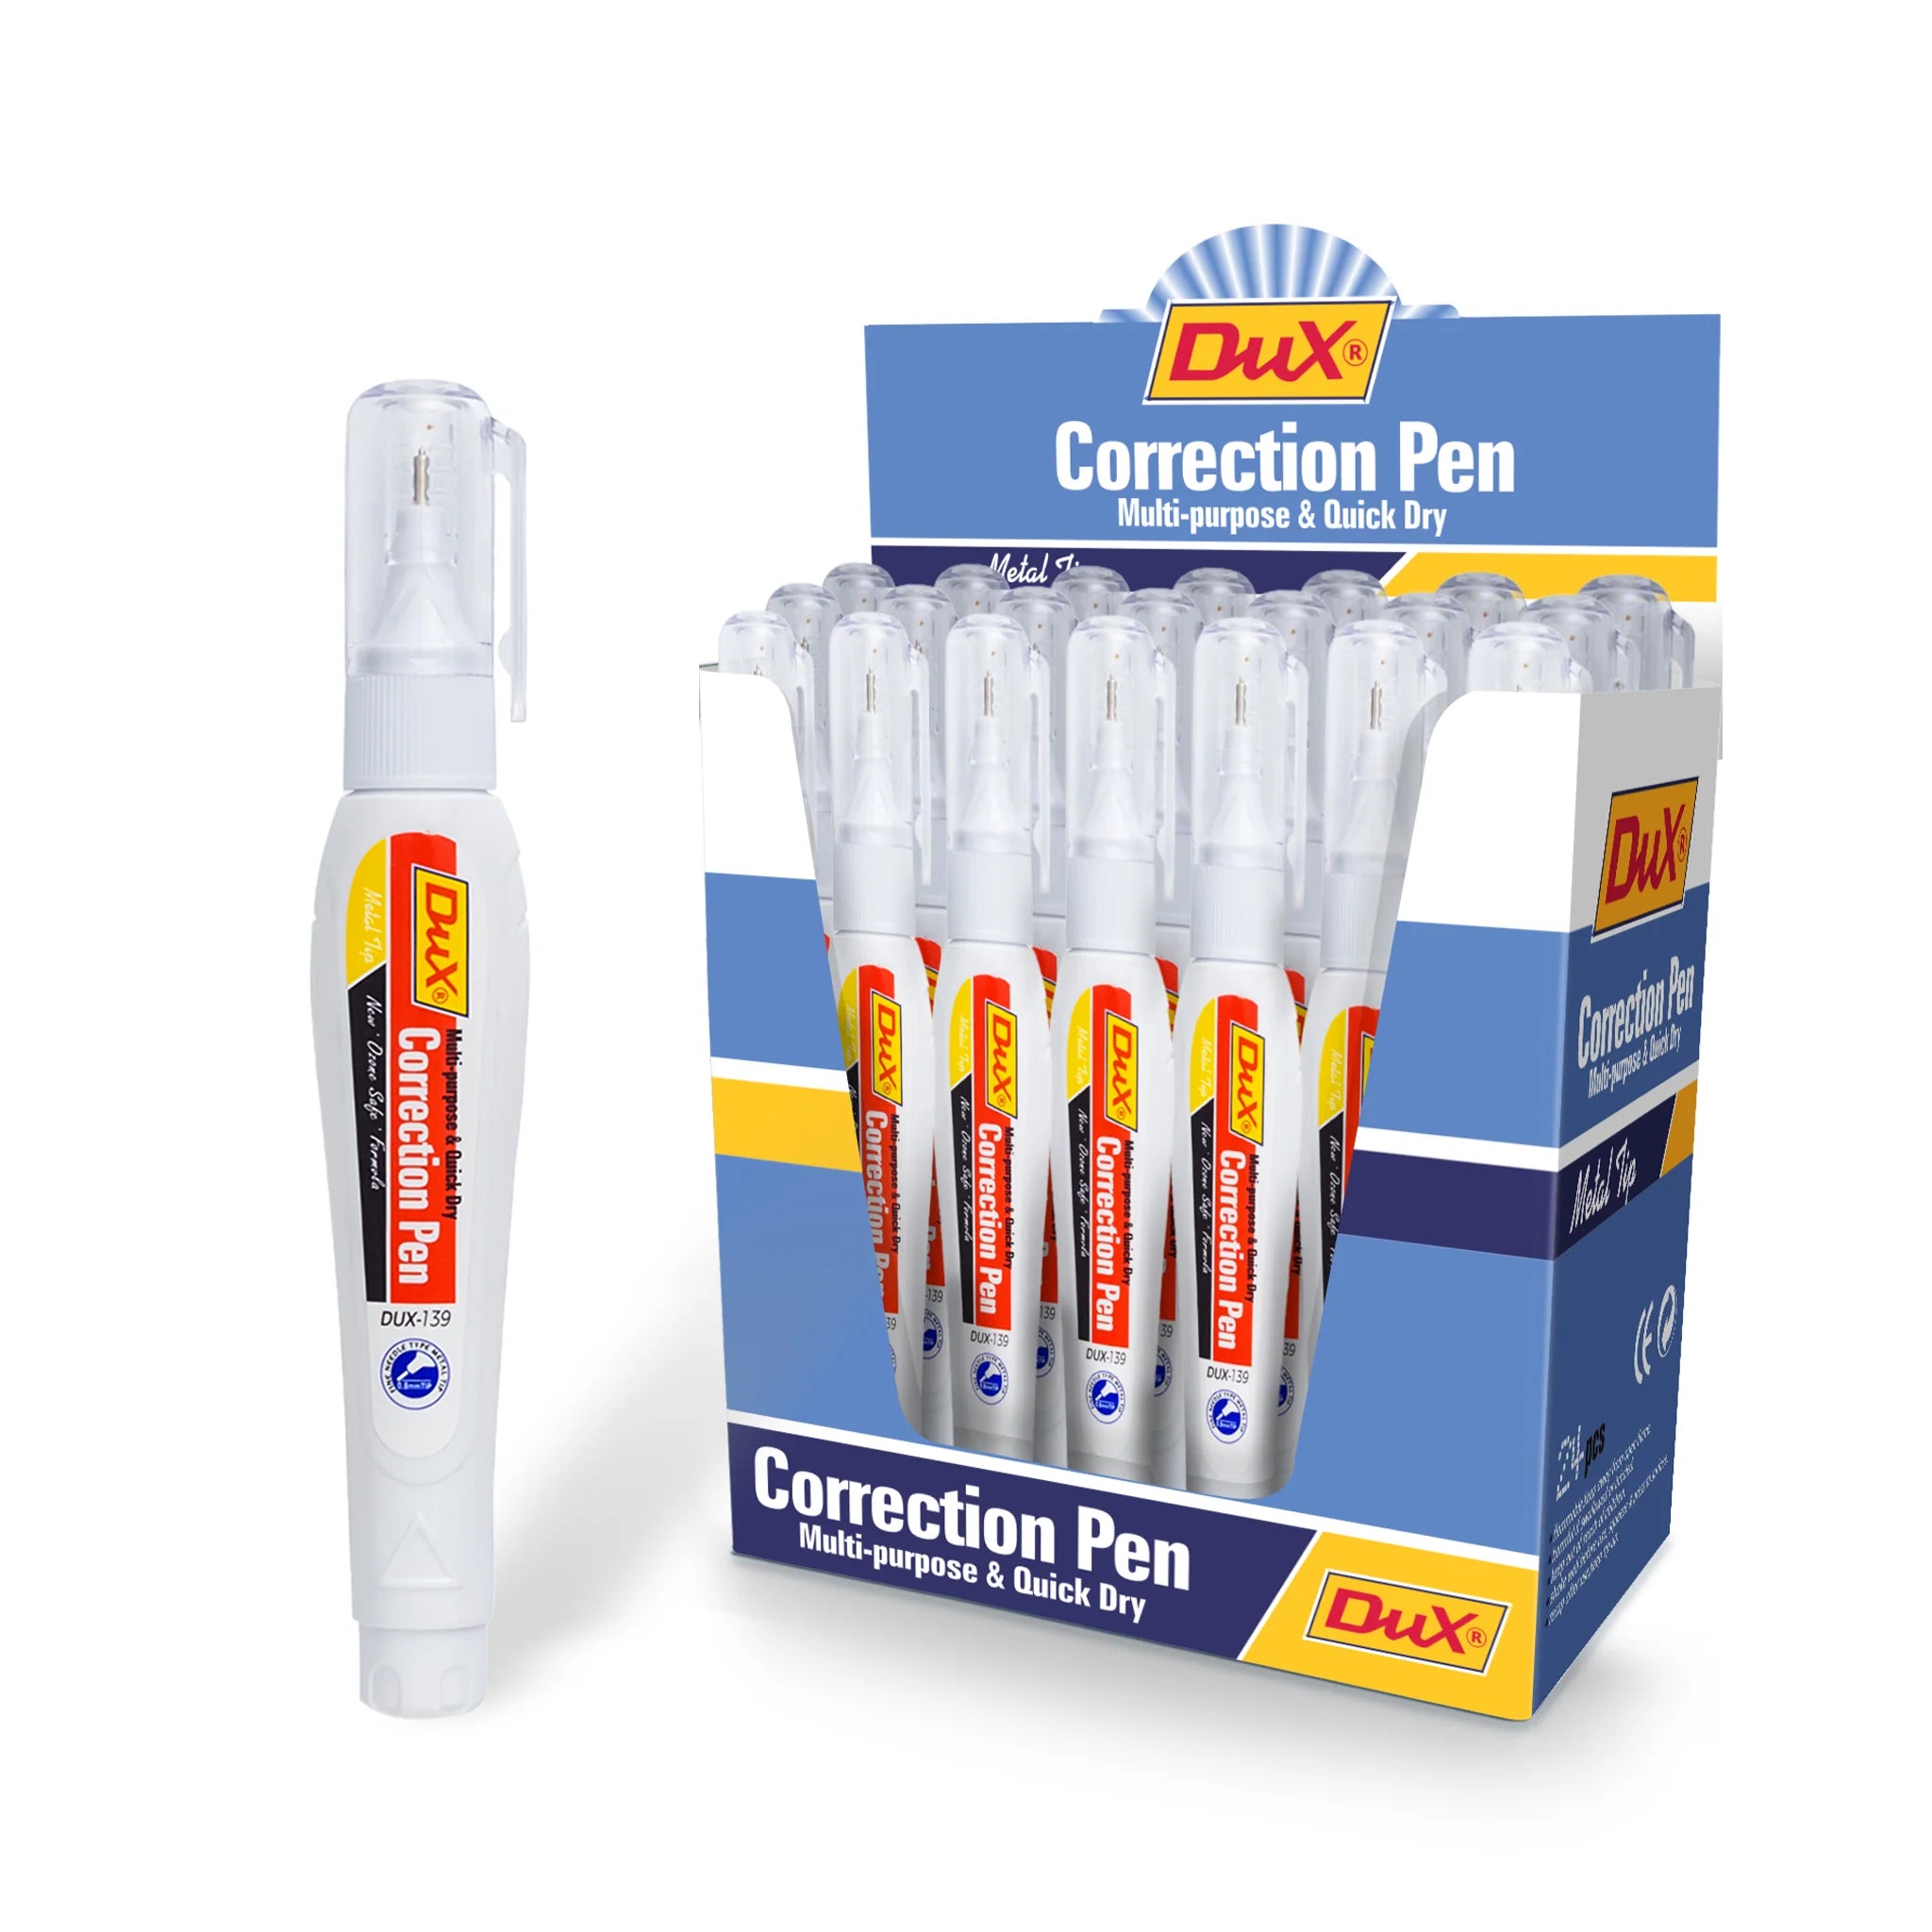 Dux 139 Correction Pen [IS][1Pc] : Get FREE delivery and huge discounts @   – KATIB - Paper and Stationery at your doorstep